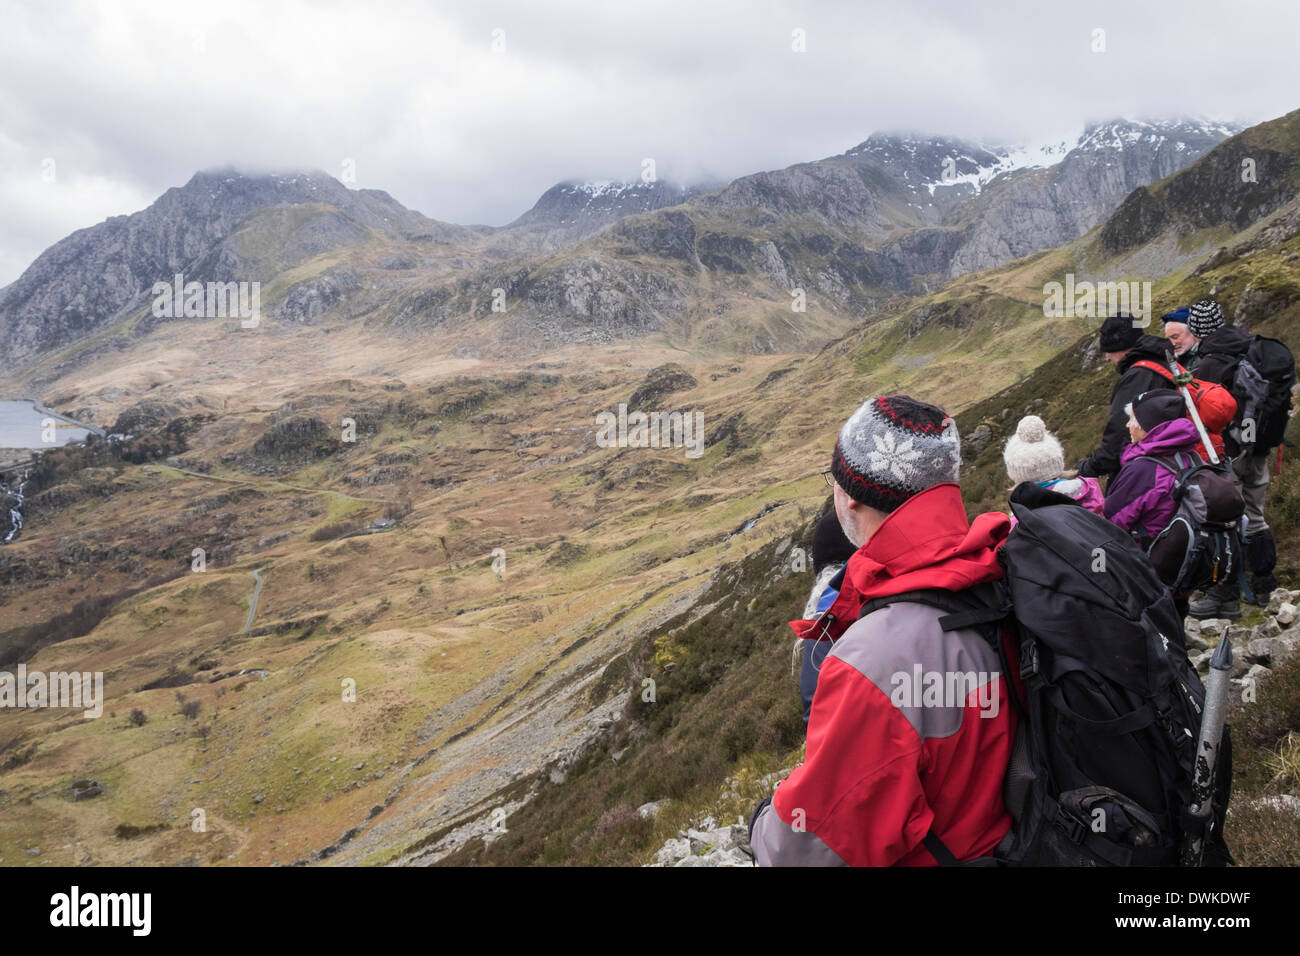 Hikers on lower slopes of Y Garn above Nant Ffrancon looking at view to Ogwen Valley in Snowdonia National Park Wales UK Britain Stock Photo